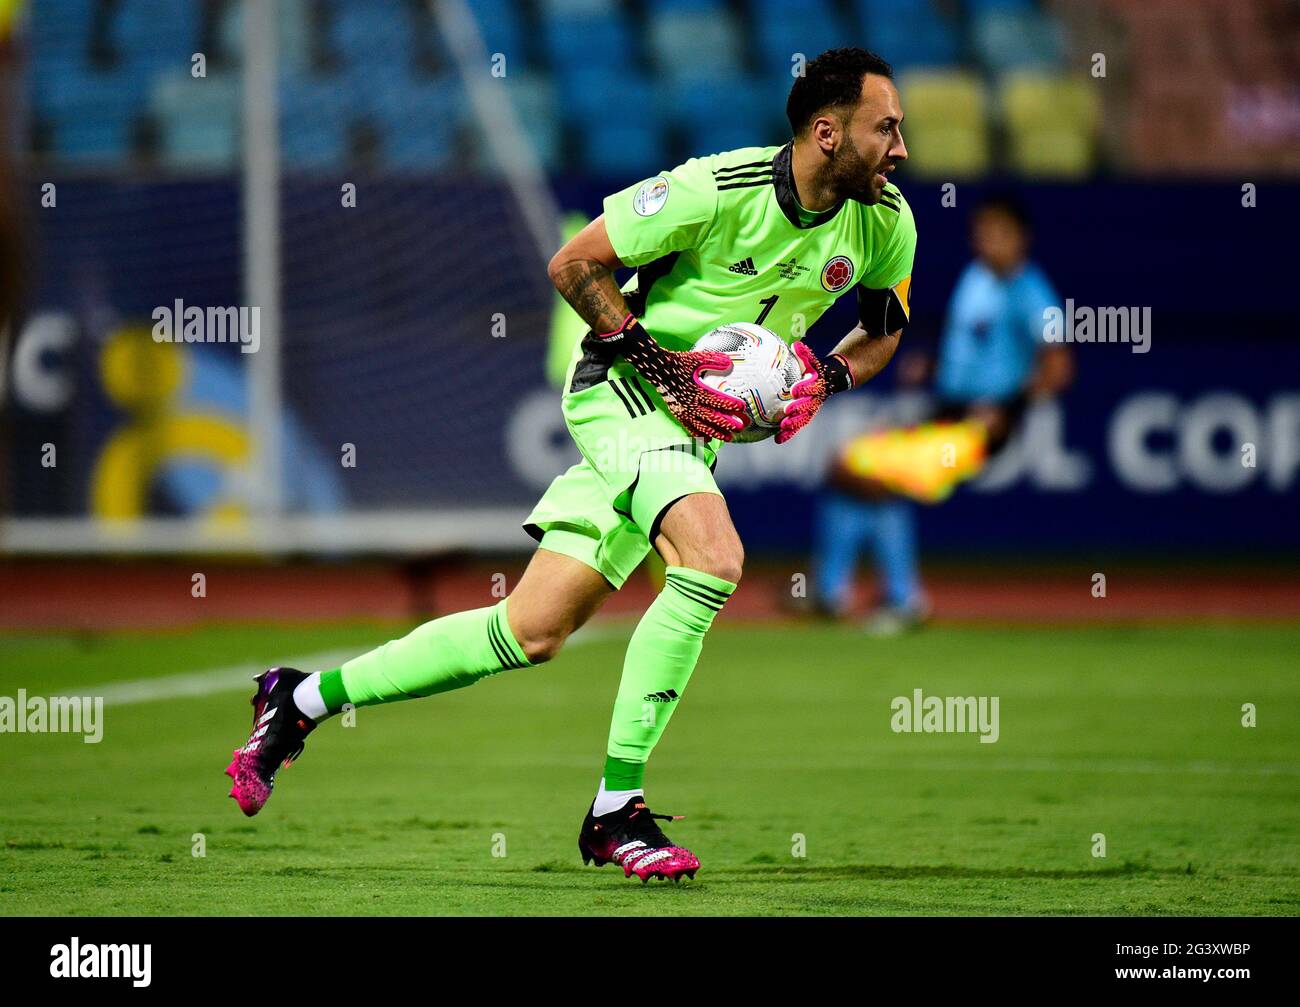 GOIANIA, BRAZIL - JUNE 17: David Ospina of Colombia in action ,during the match between Colombia and Venezuela as part of Conmebol Copa America Brazil 2021 at Estadio Olimpico on June 17, 2021 in Goiania, Brazil. (Photo by MB Media) Stock Photo